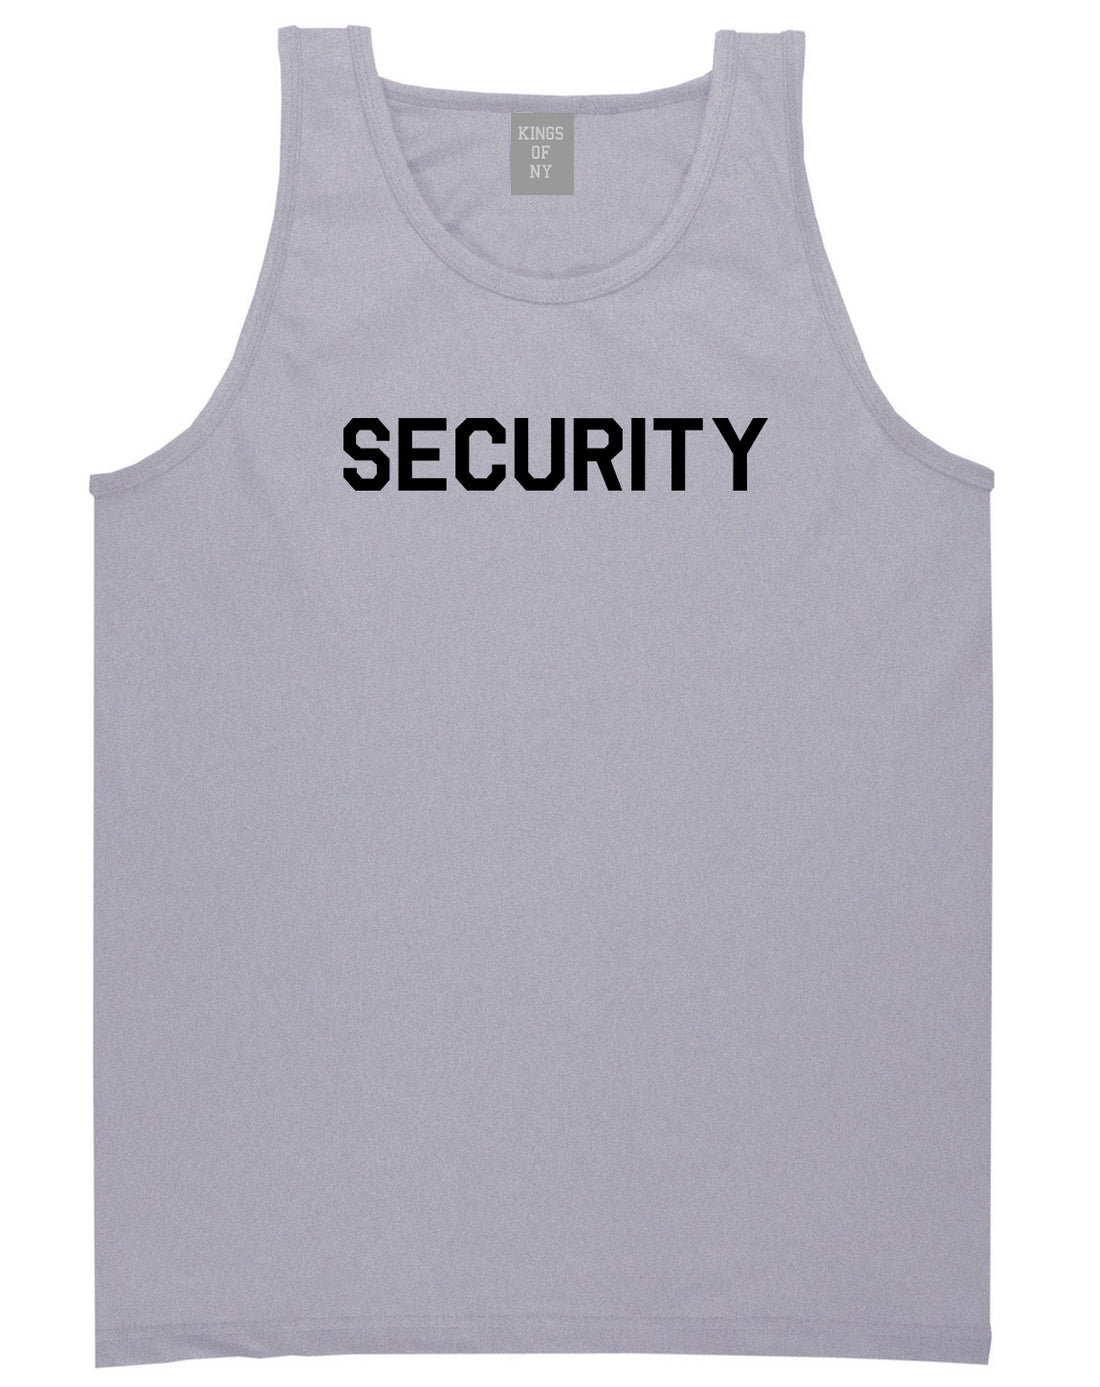 Event Security Uniform Mens Grey Tank Top Shirt by KINGS OF NY